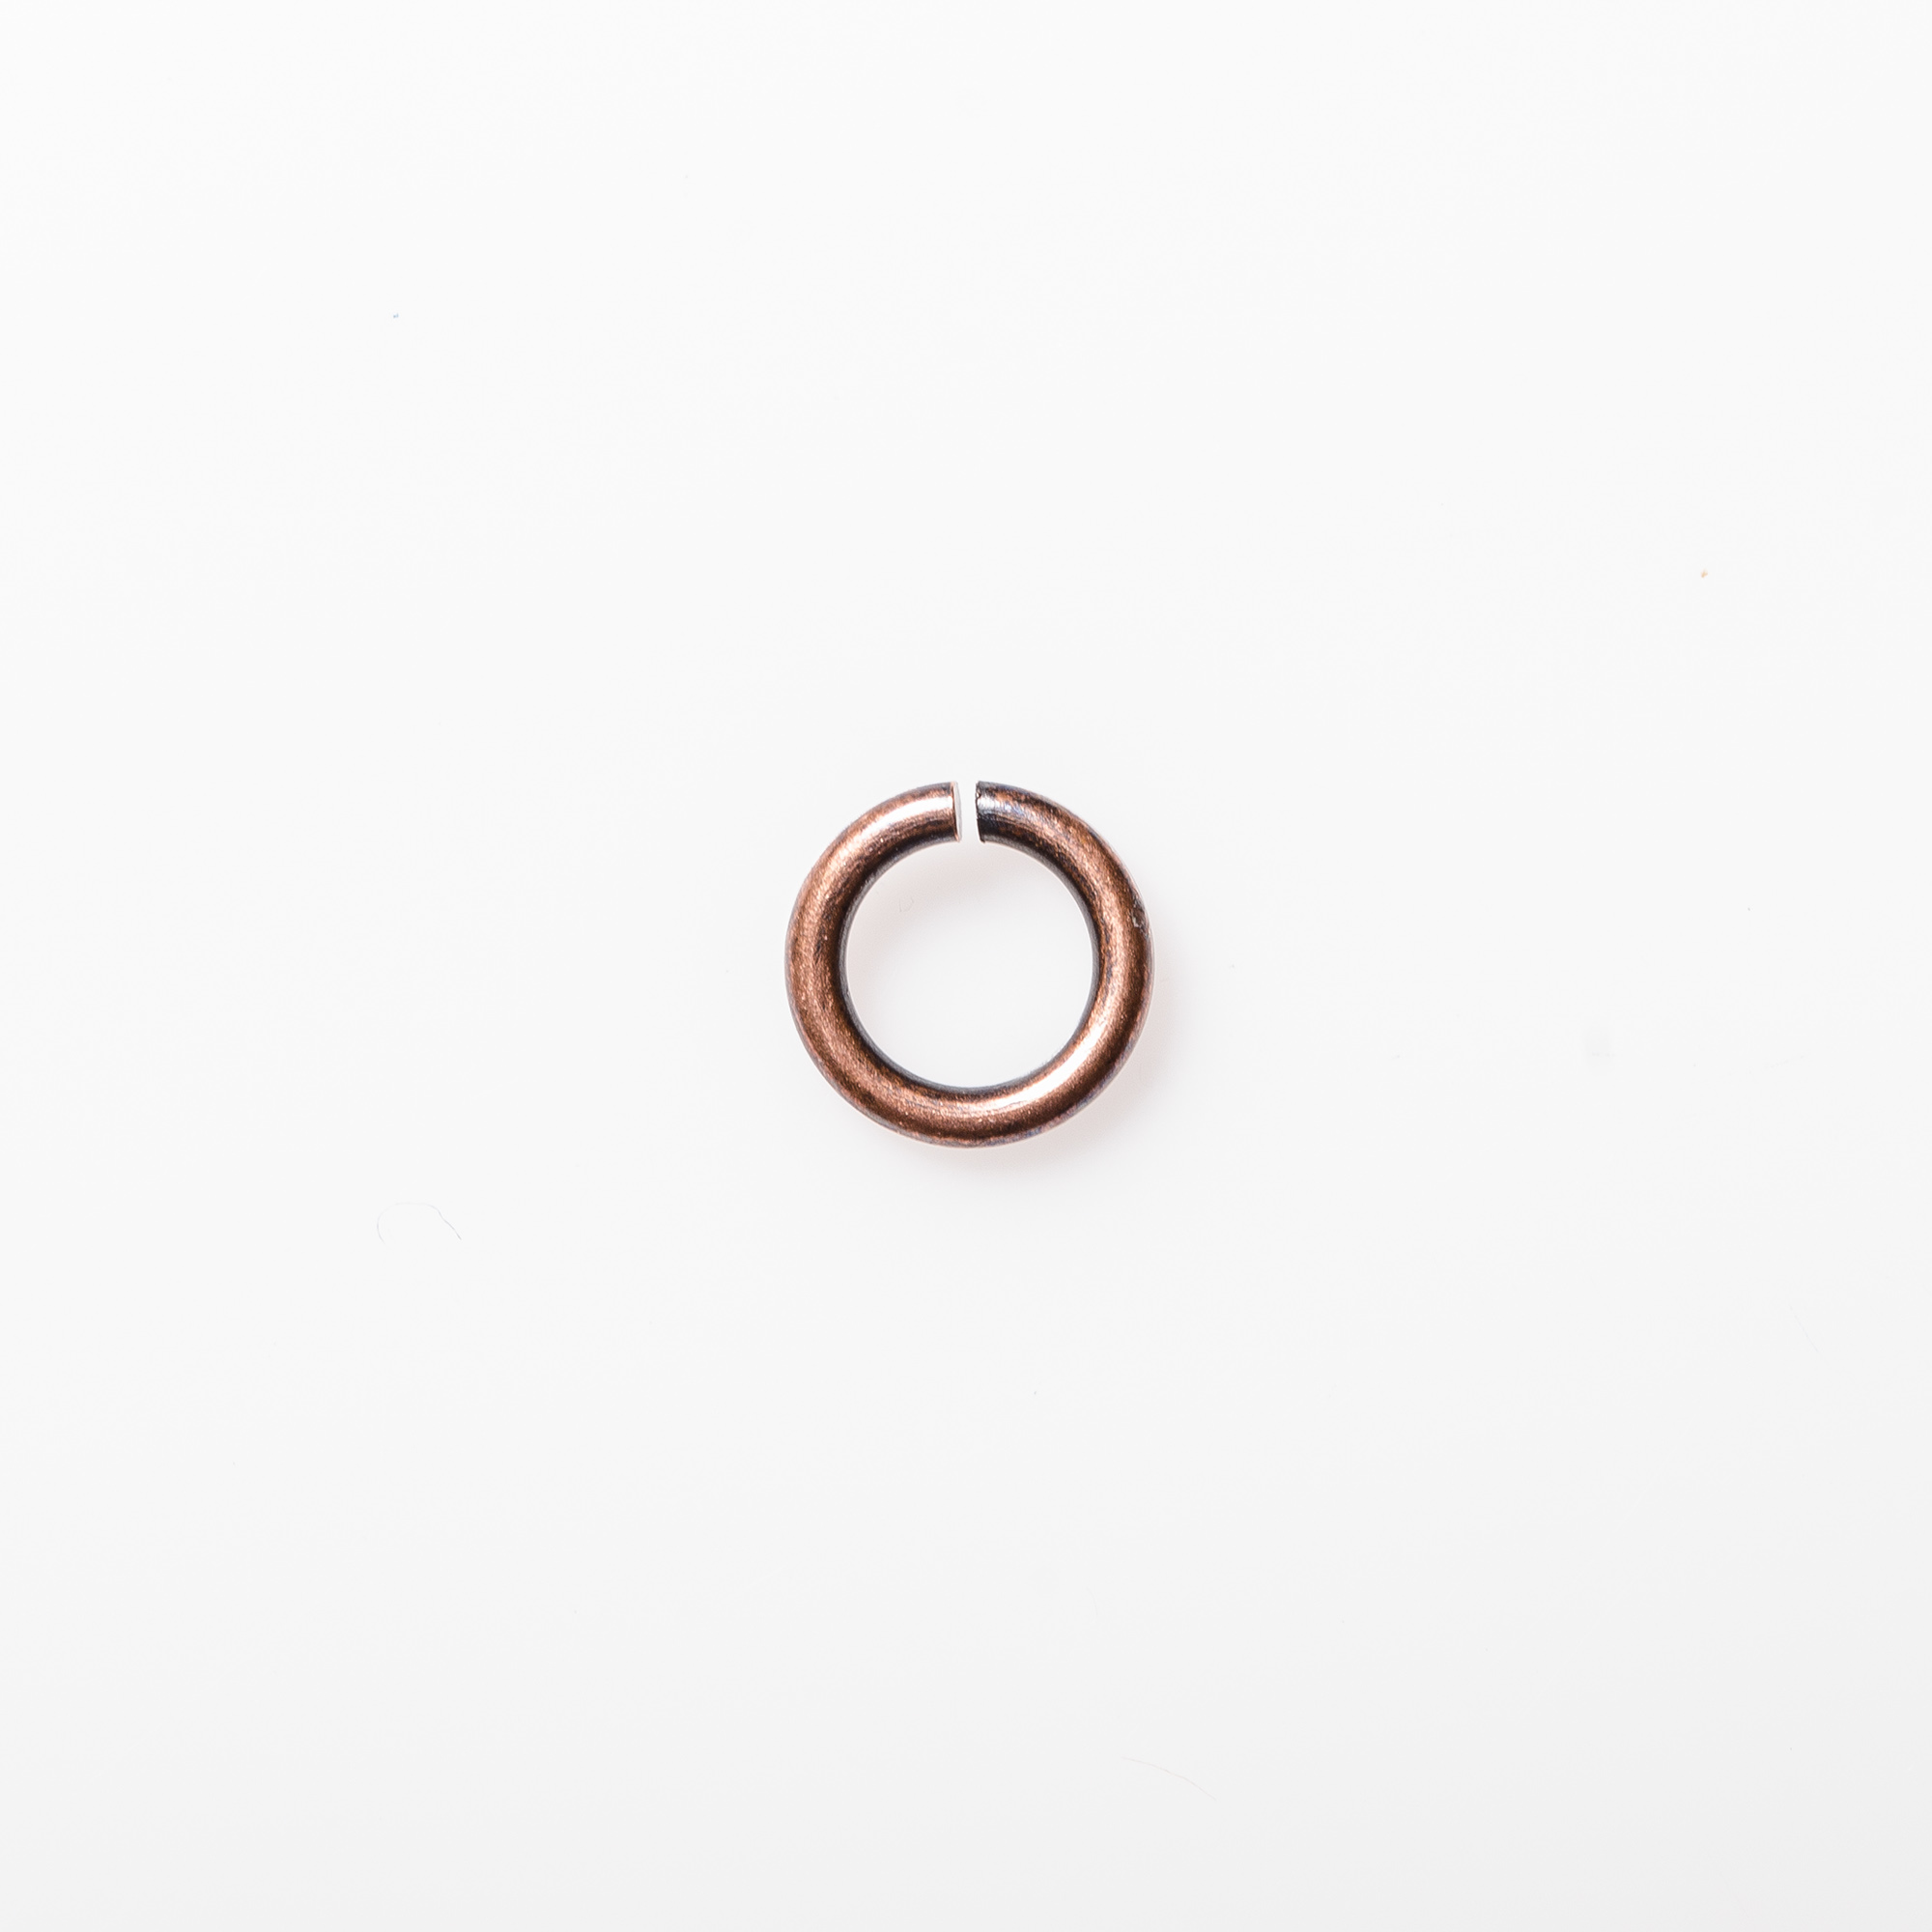 Antique Copper Plated Jump Rings